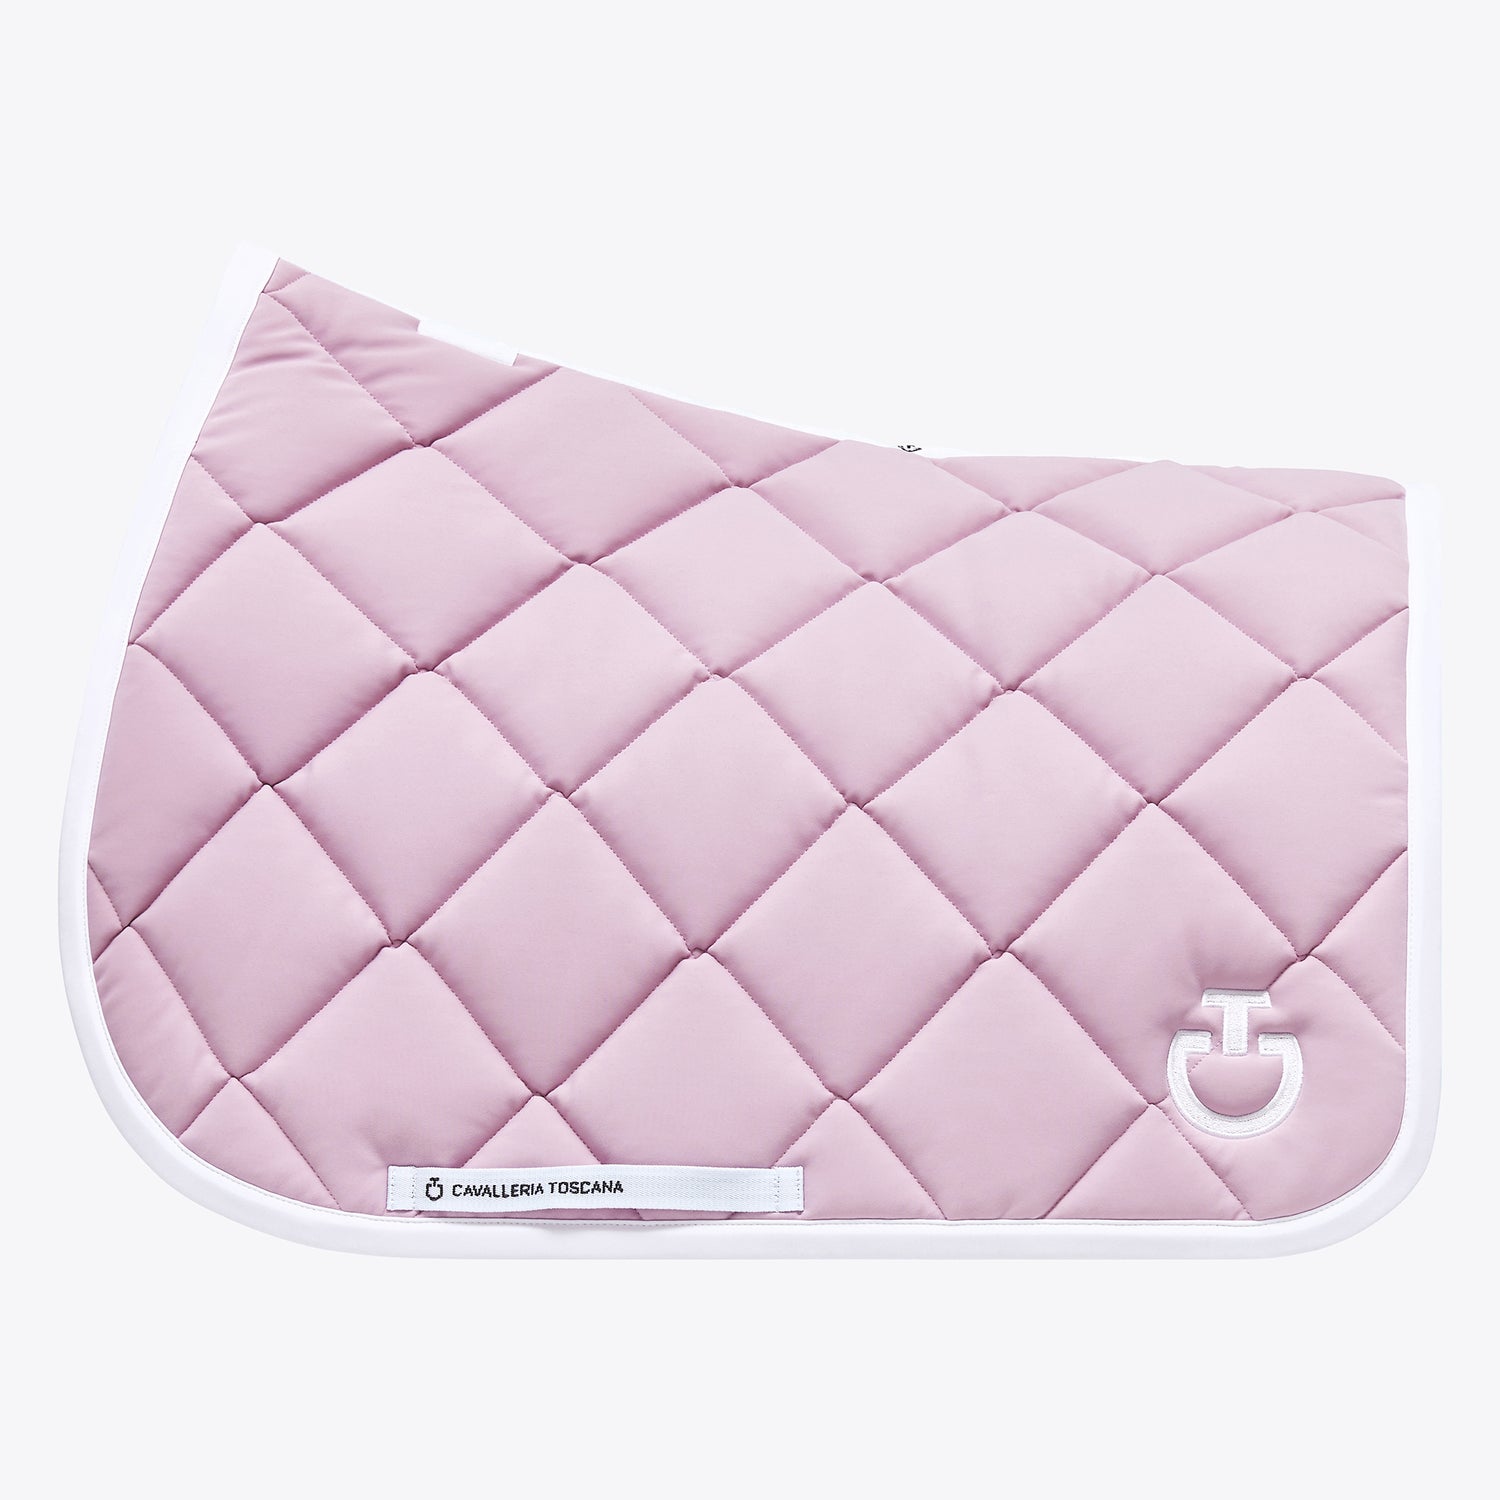 Chanel White Lambskin Quilted Tote Bag with Embossed Snakeskin “Cc” Logo